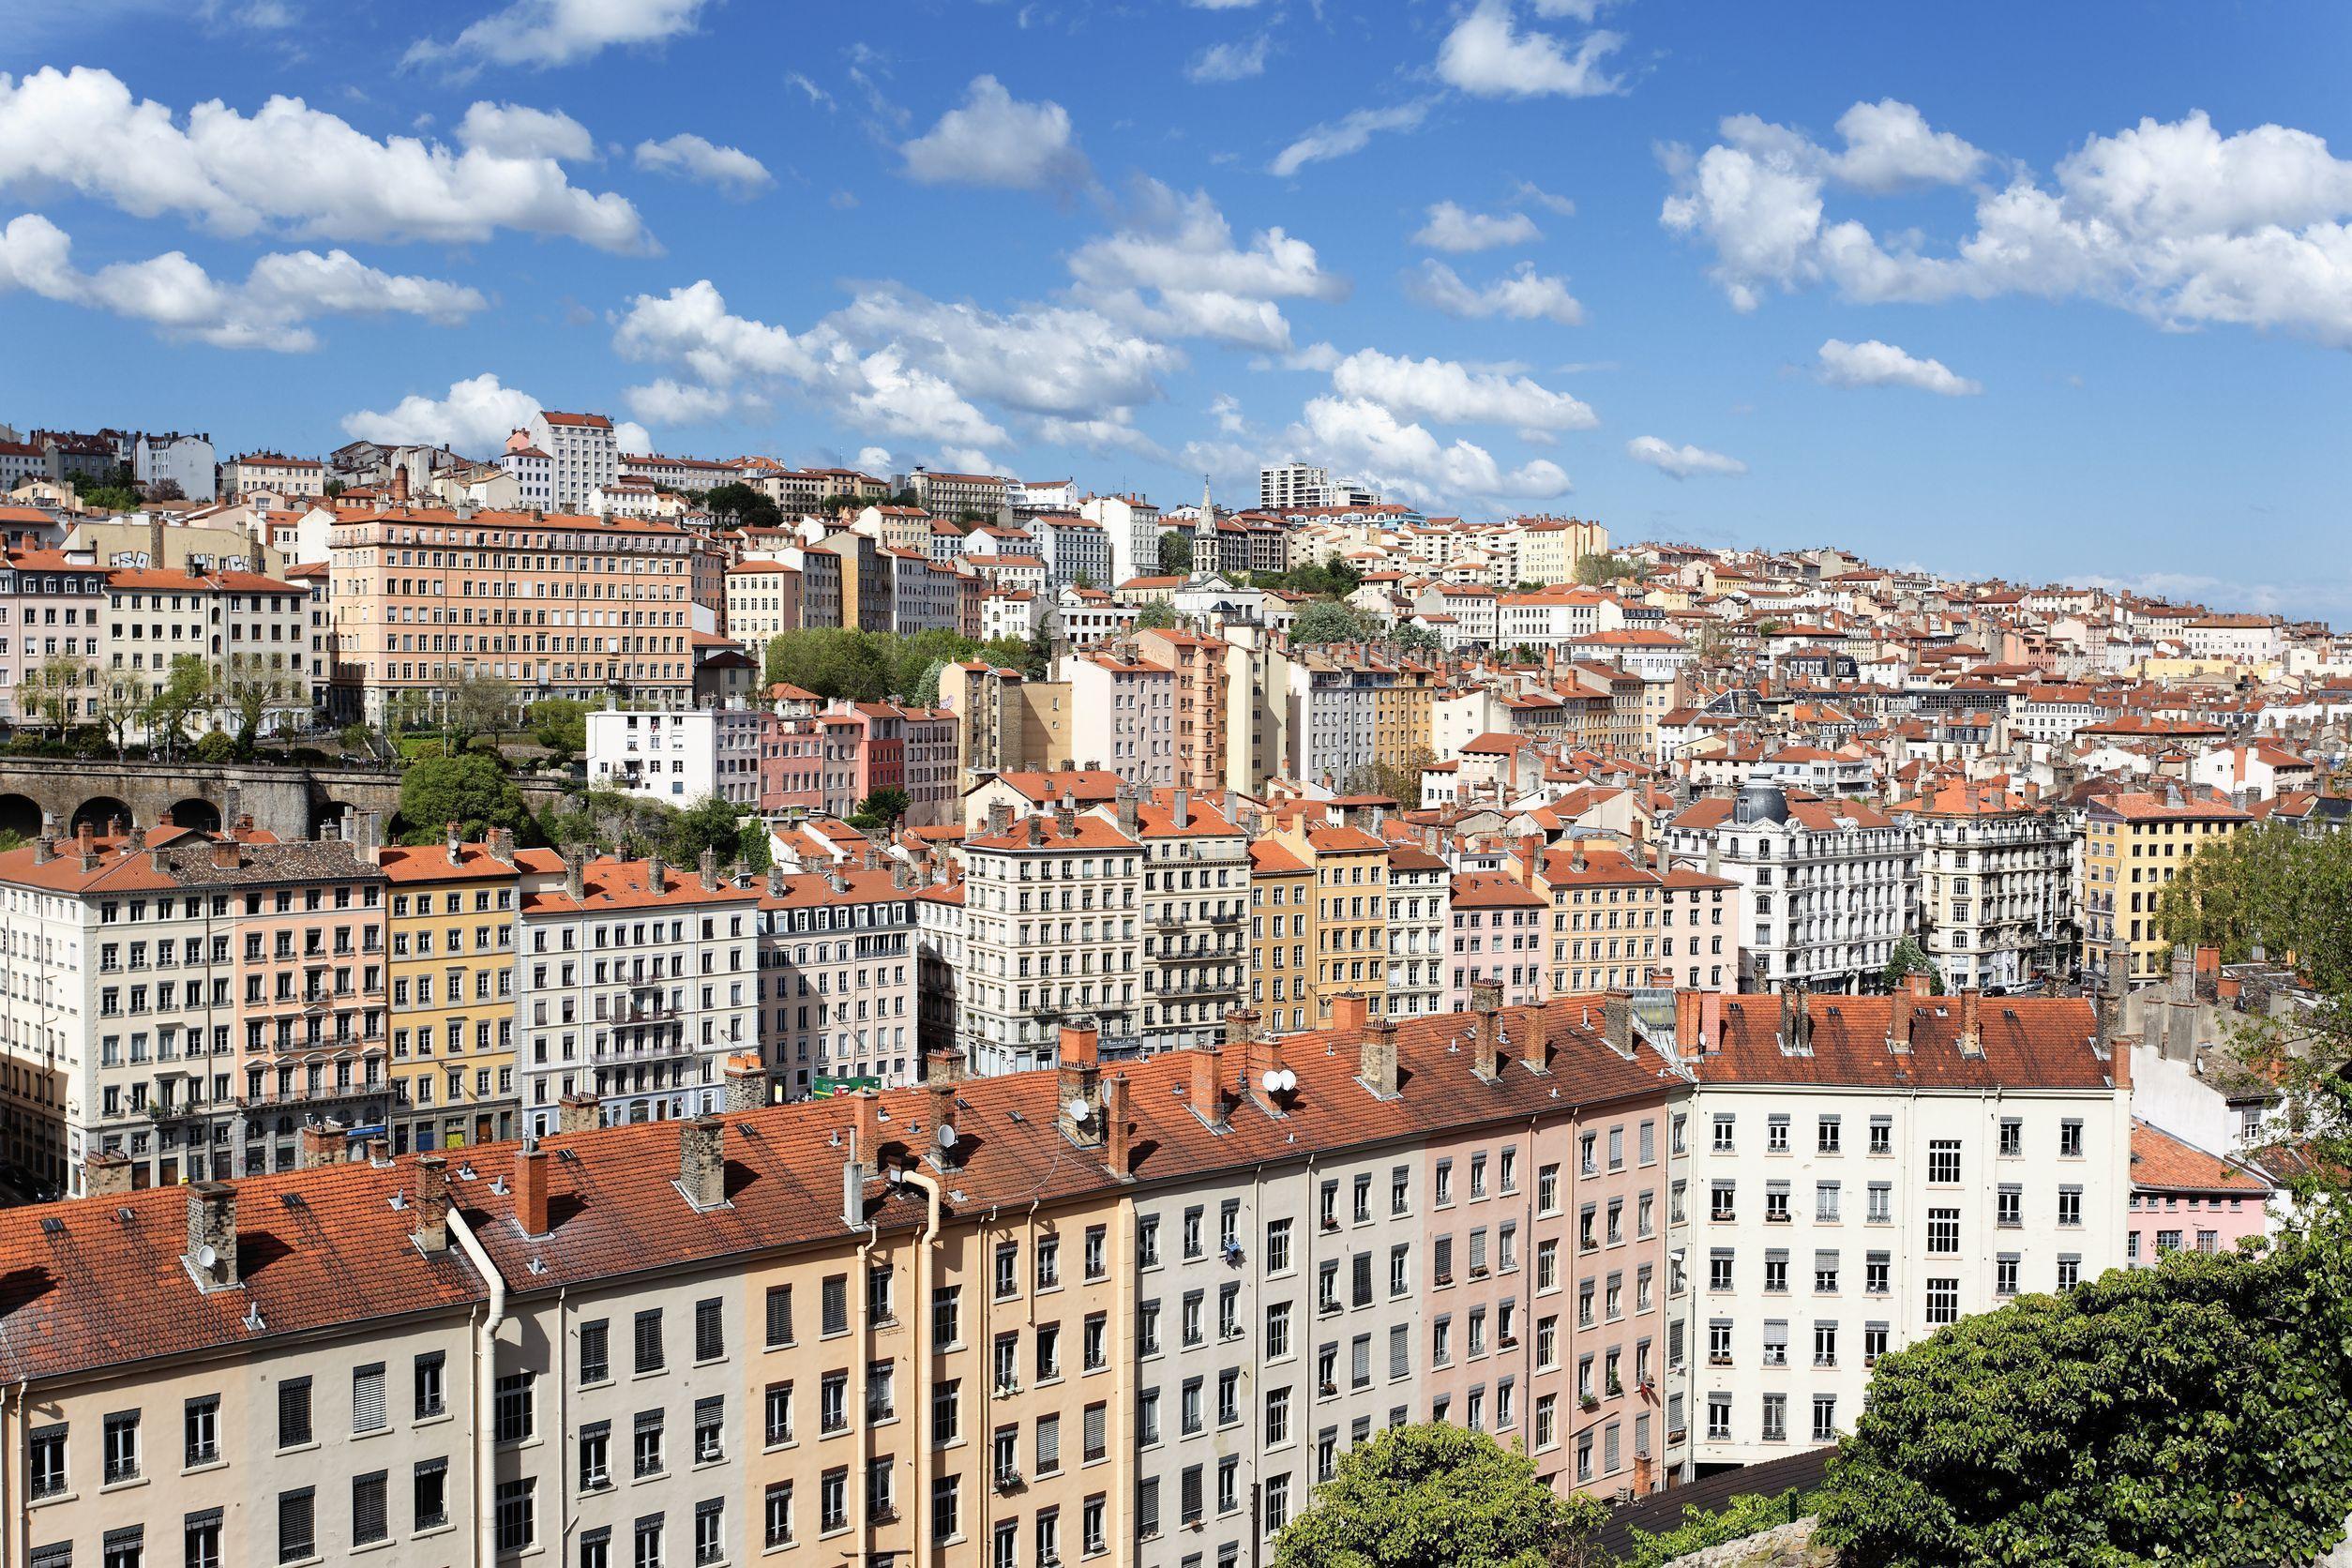 The city of Lyon, France wallpaper and image